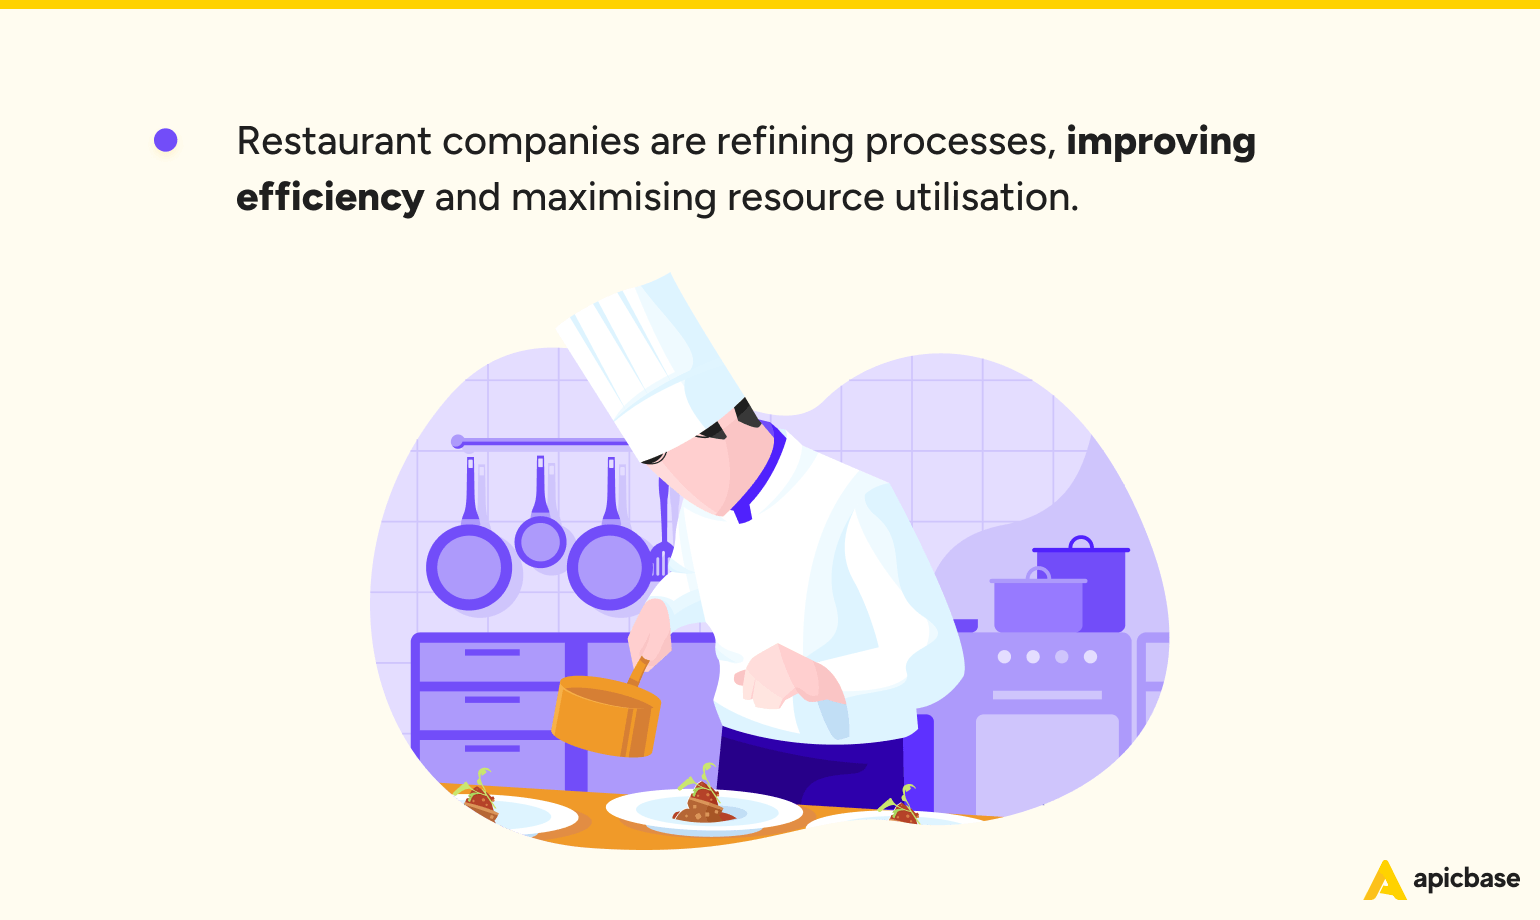 #2 - Restaurant Trends - Operational Excellence